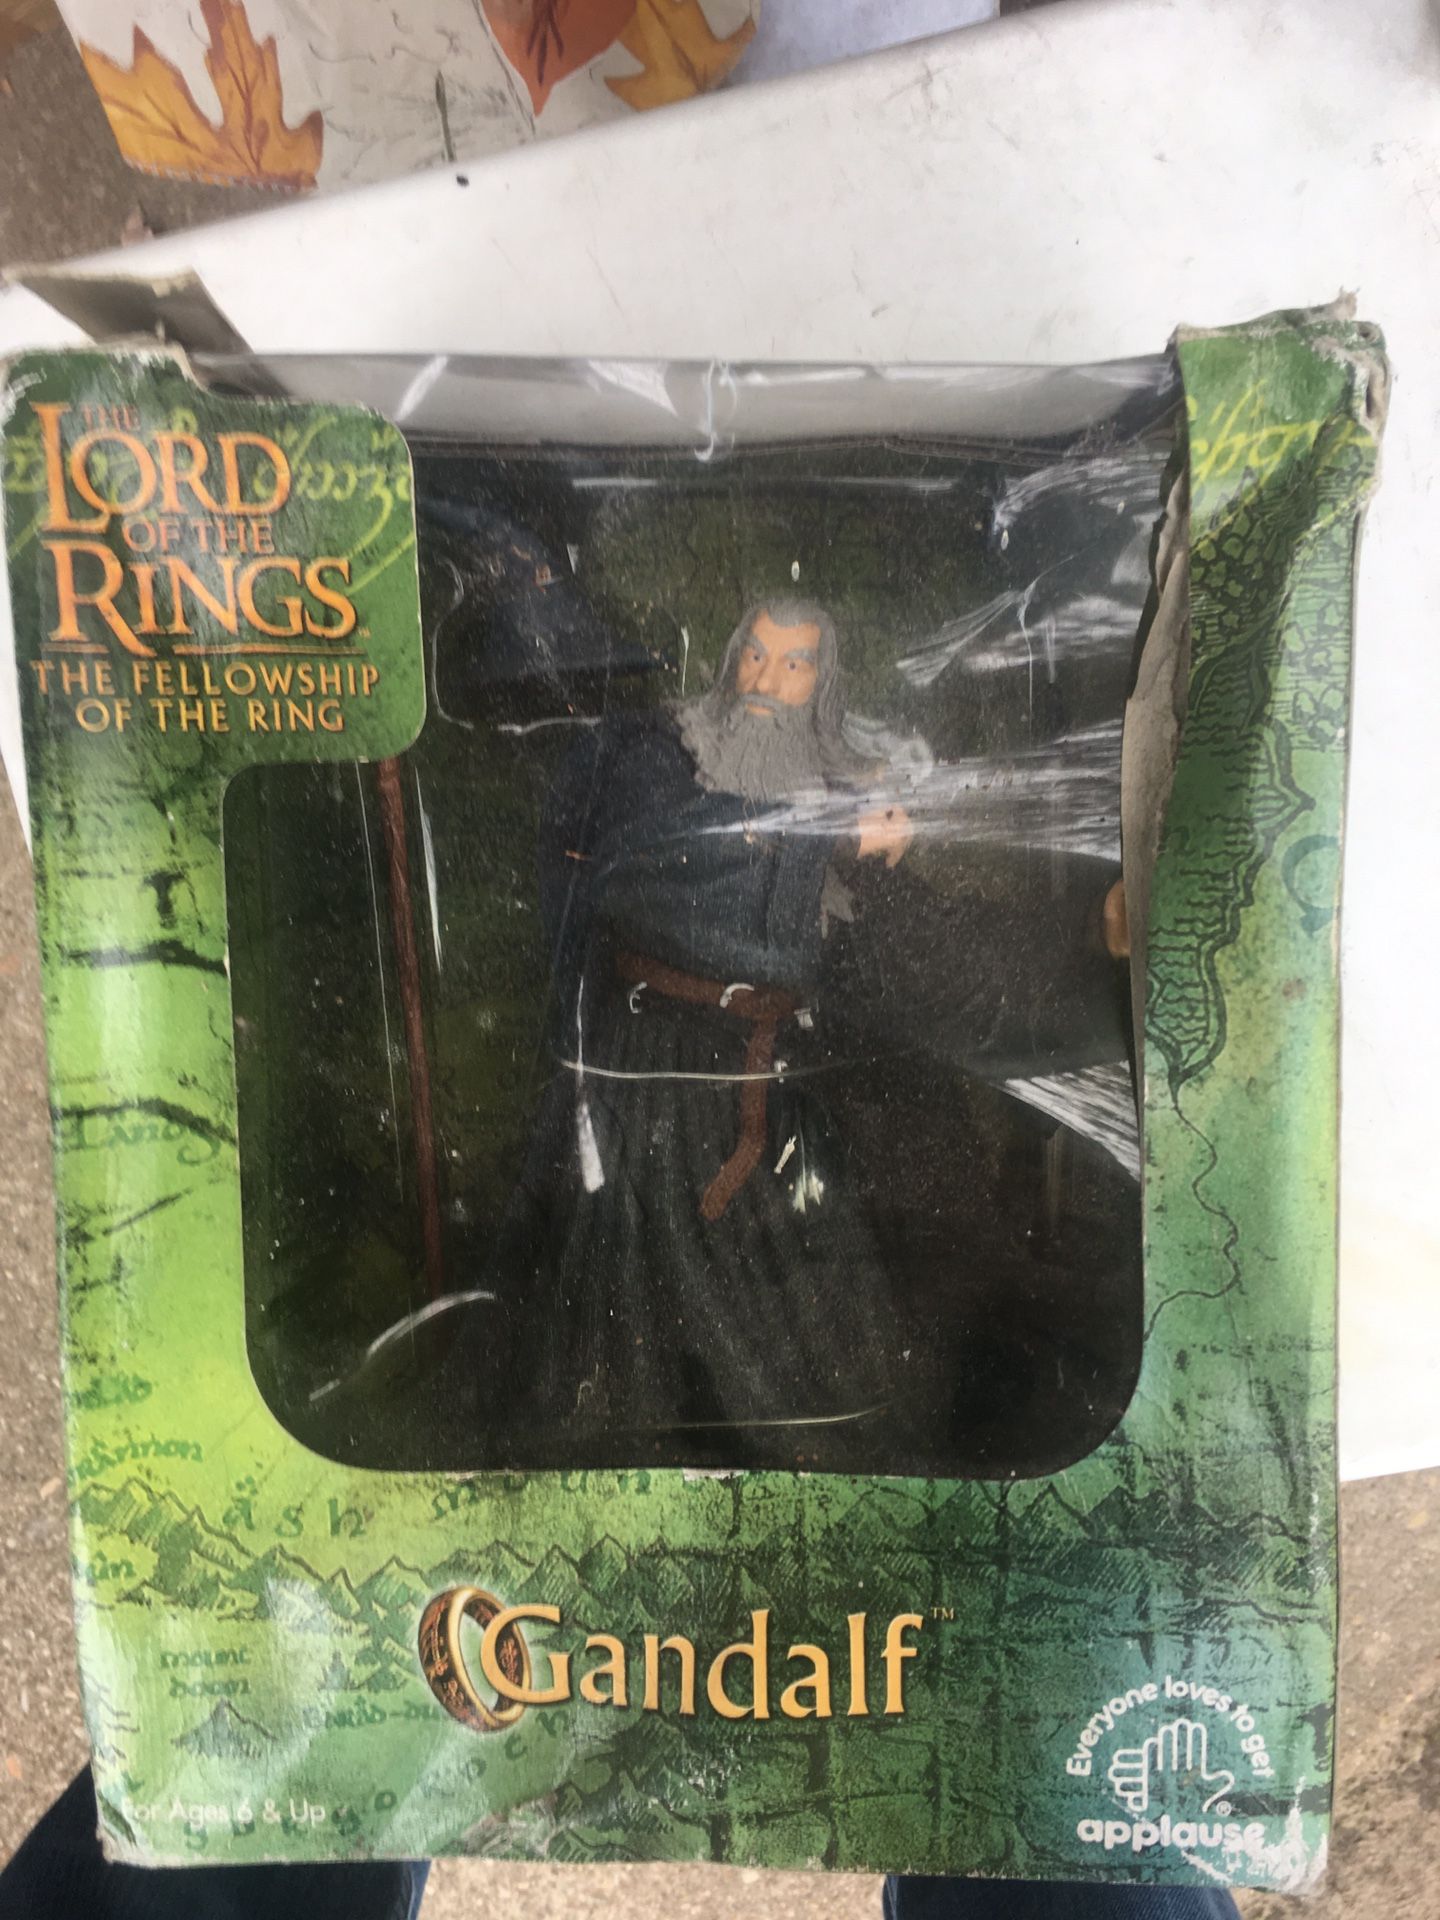 Lord of the rings action figure collection inbox only $20 firm